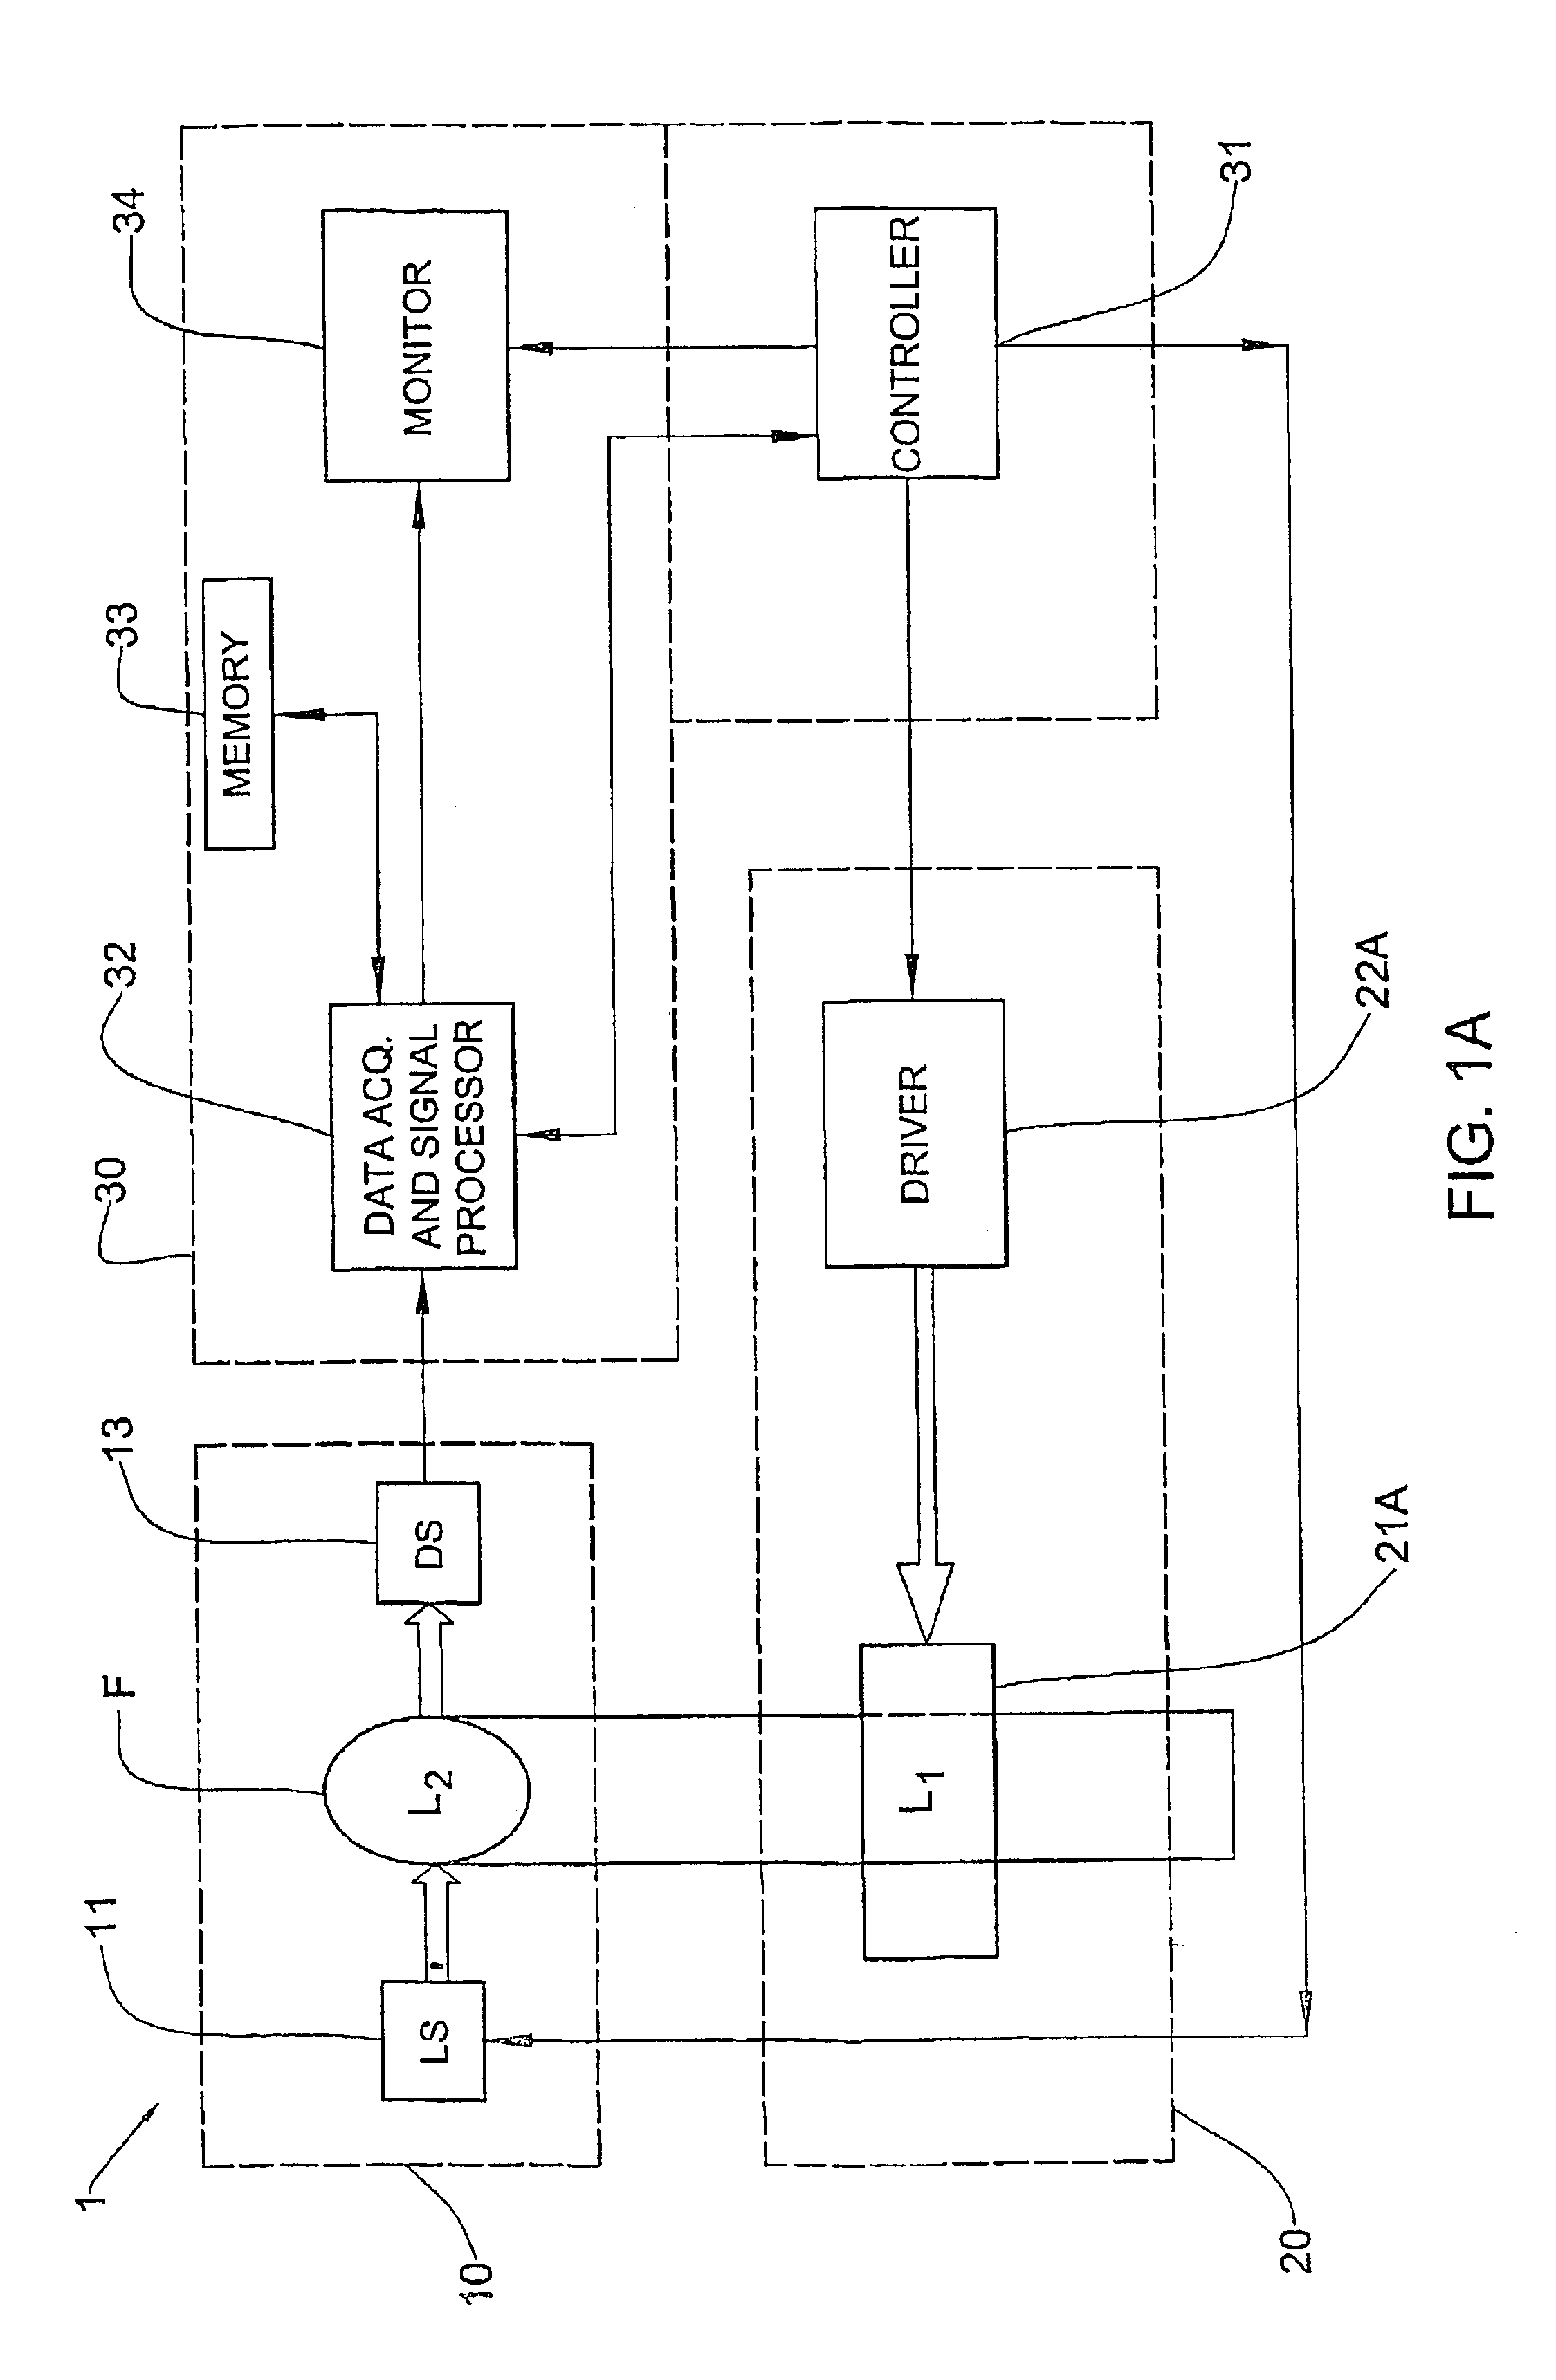 Method and device for measuring concentration of glucose or other substances in blood